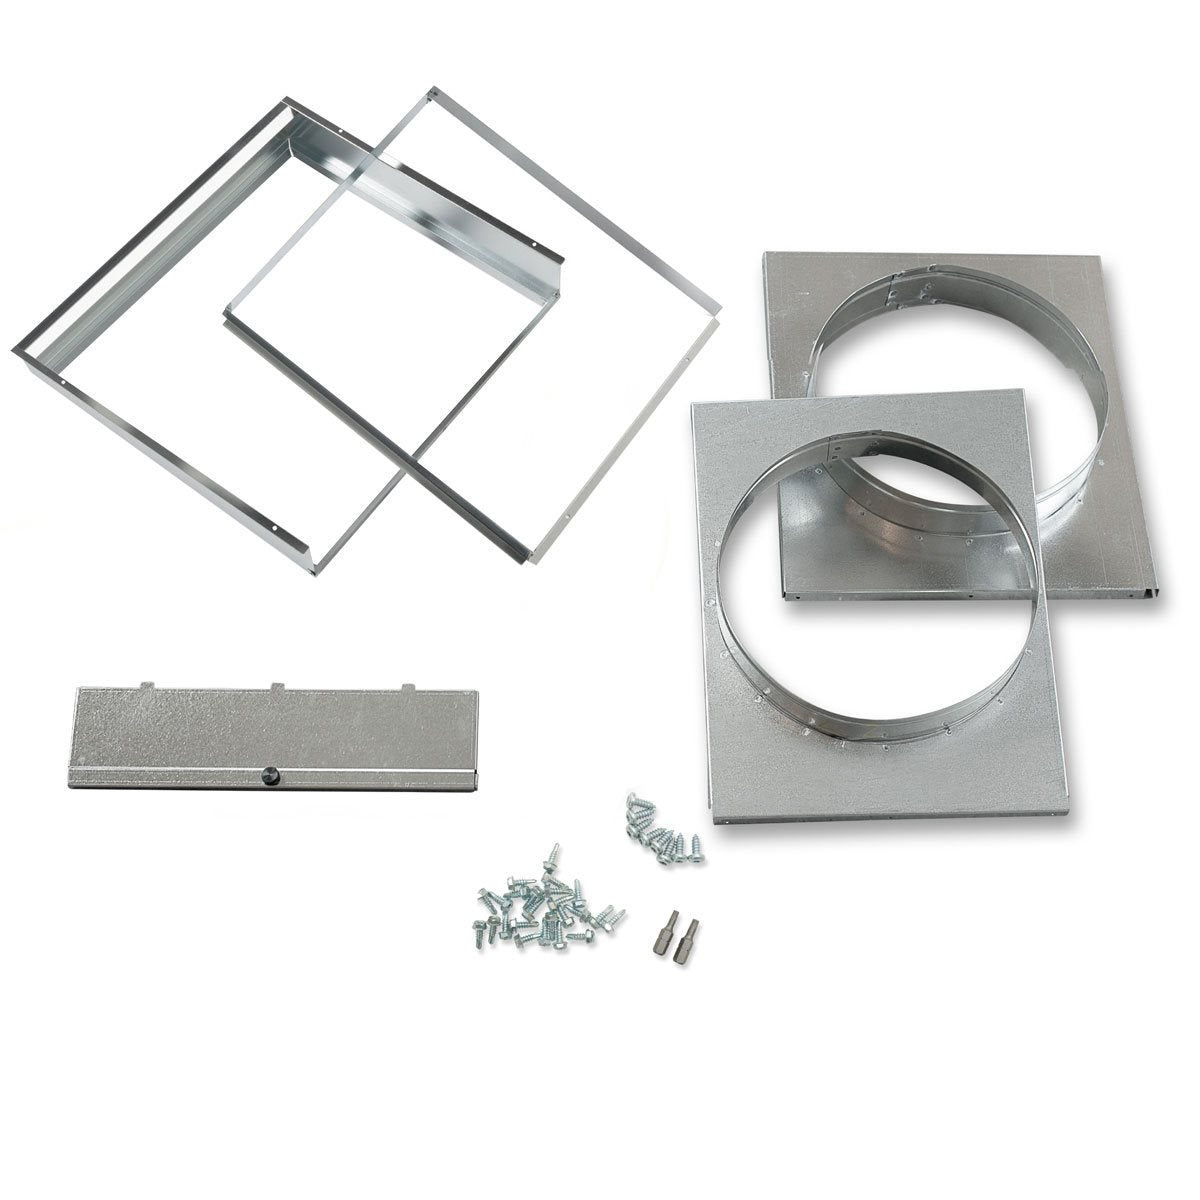 Product Image:Anden Ducting Kit for Dehumidifier 210 Pints for A210V1